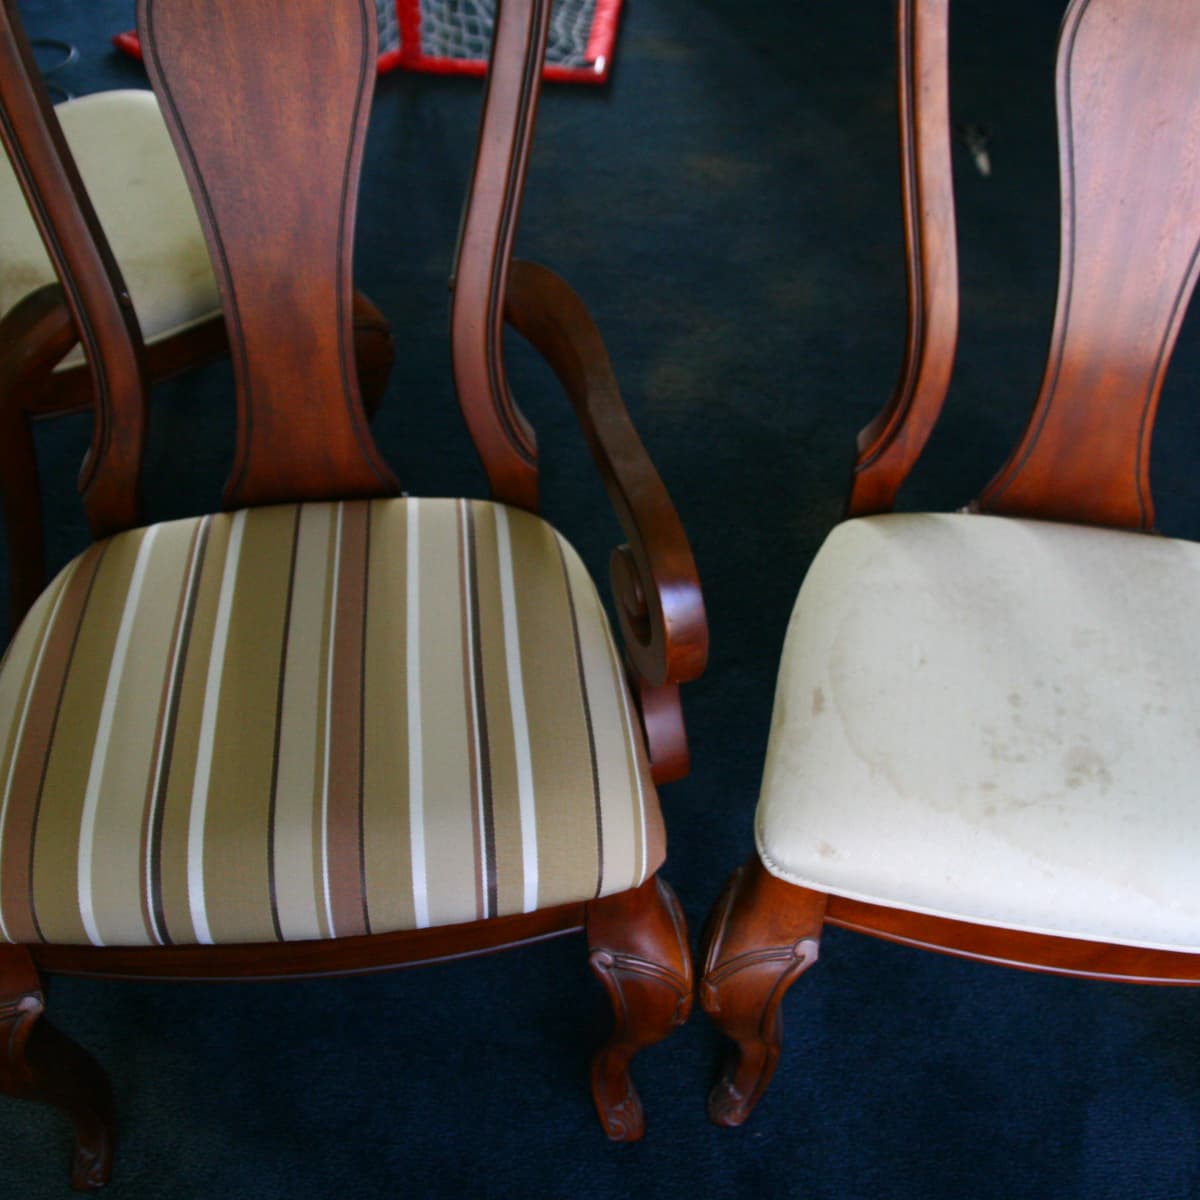 How To Reupholster A Dining Room Chair, How To Reupholster A Chair Uk